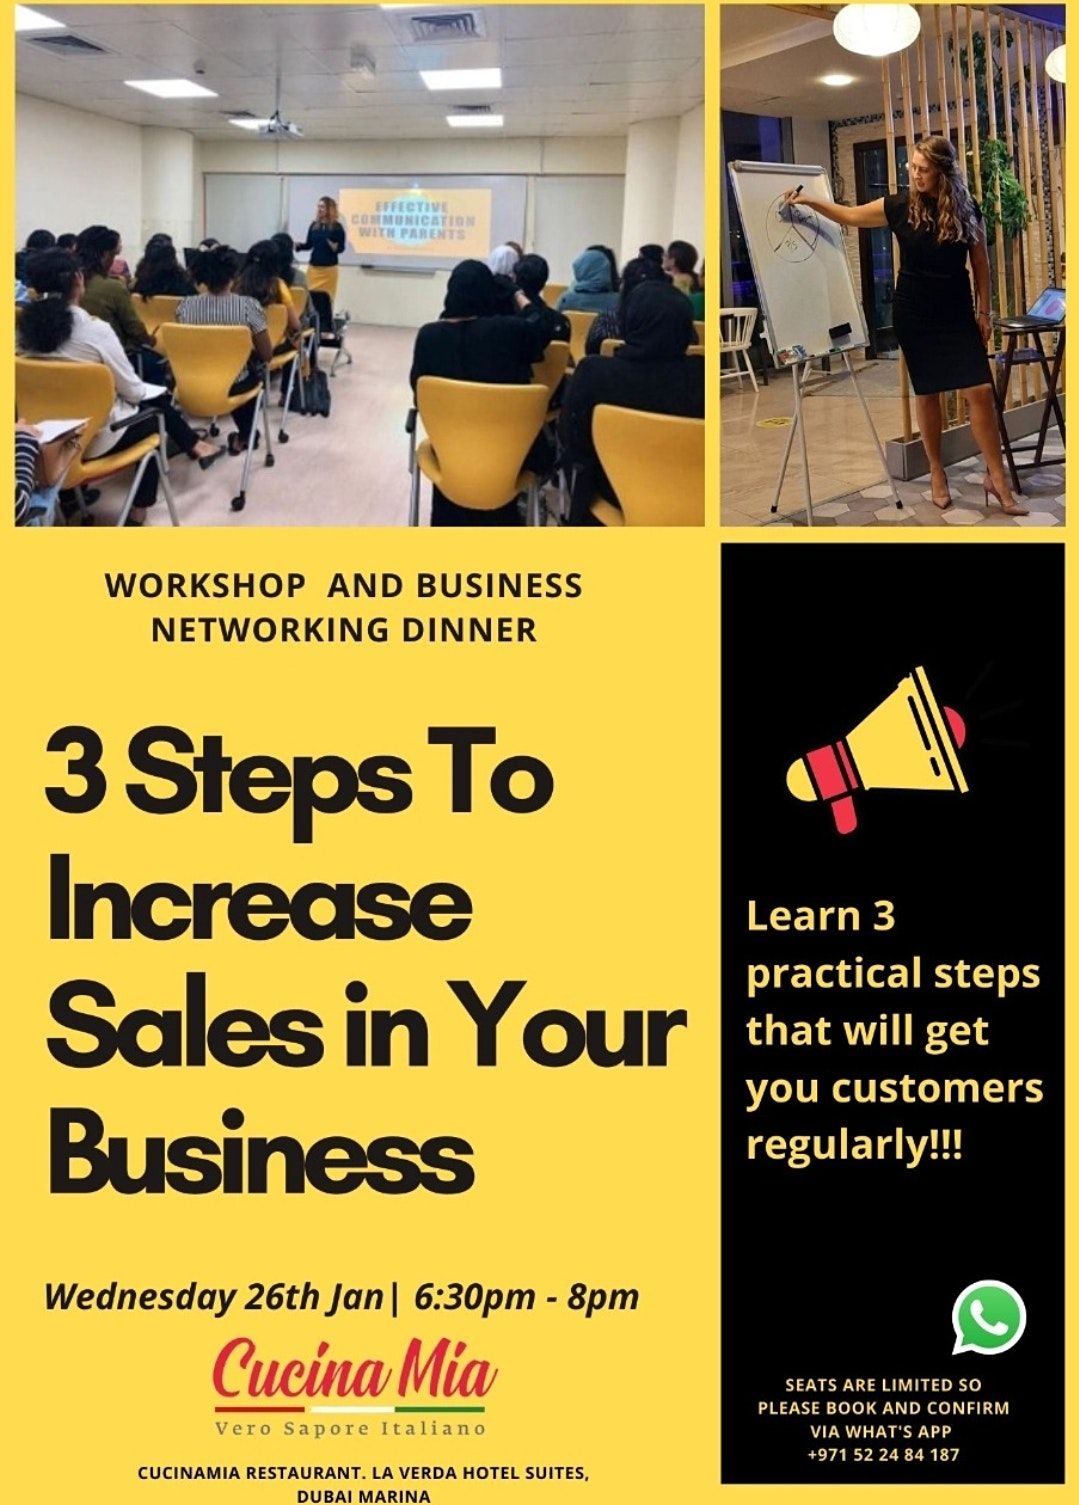 3 STEPS TO INCRESE SALES IN YOUR BUSINESS